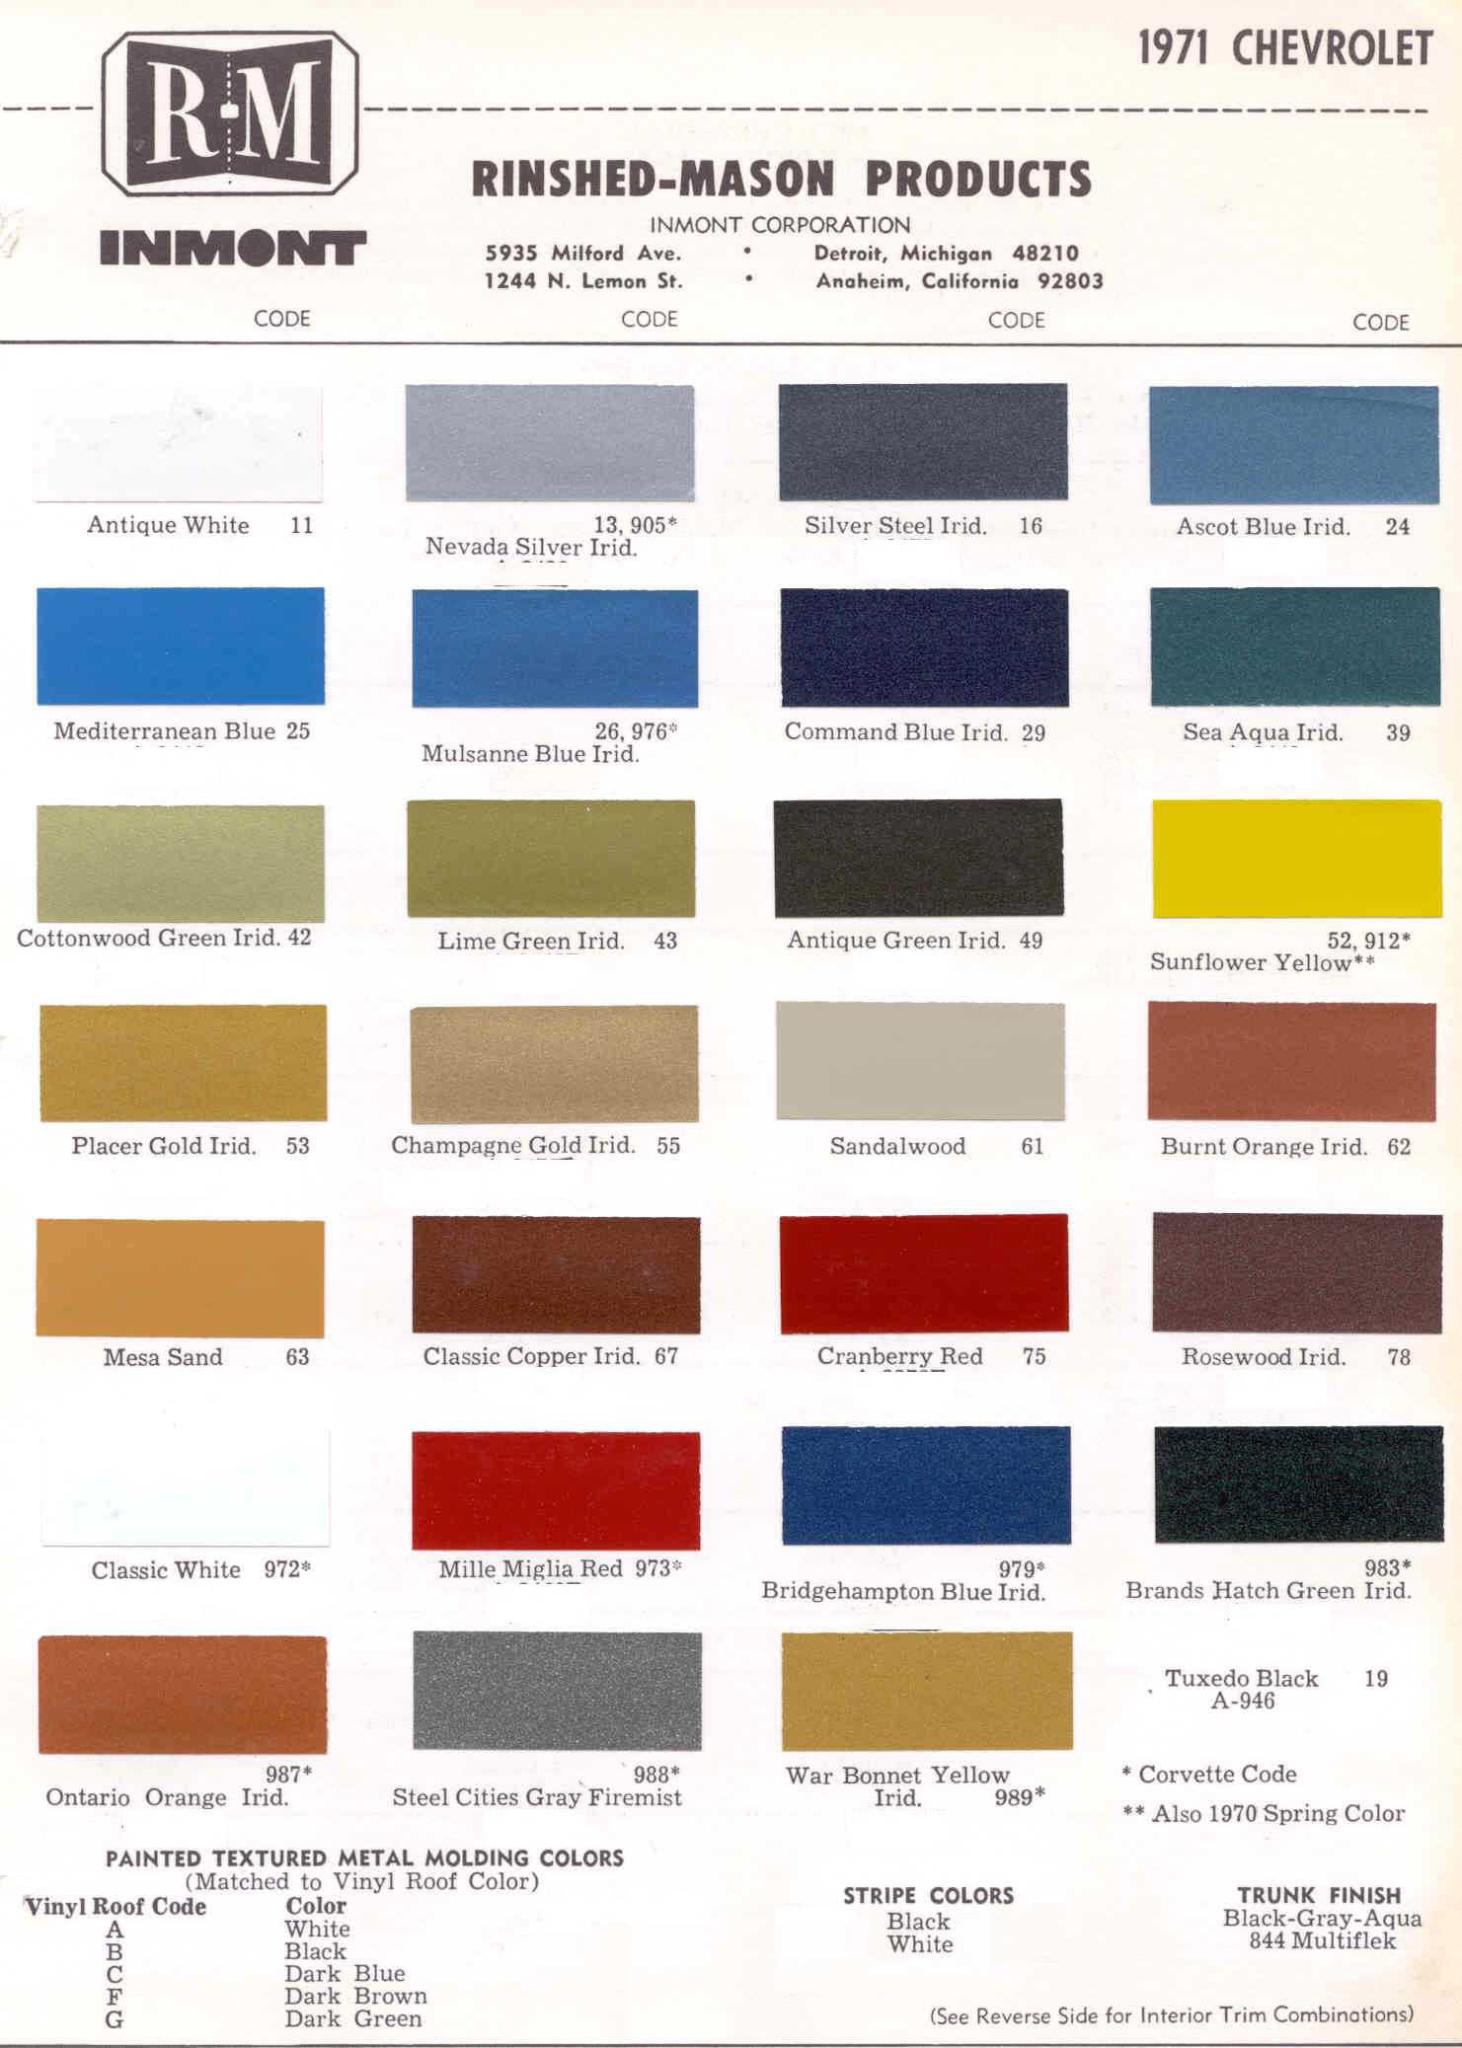 Color Codes and Color Swatch Examples of the Oem Paint from 1971